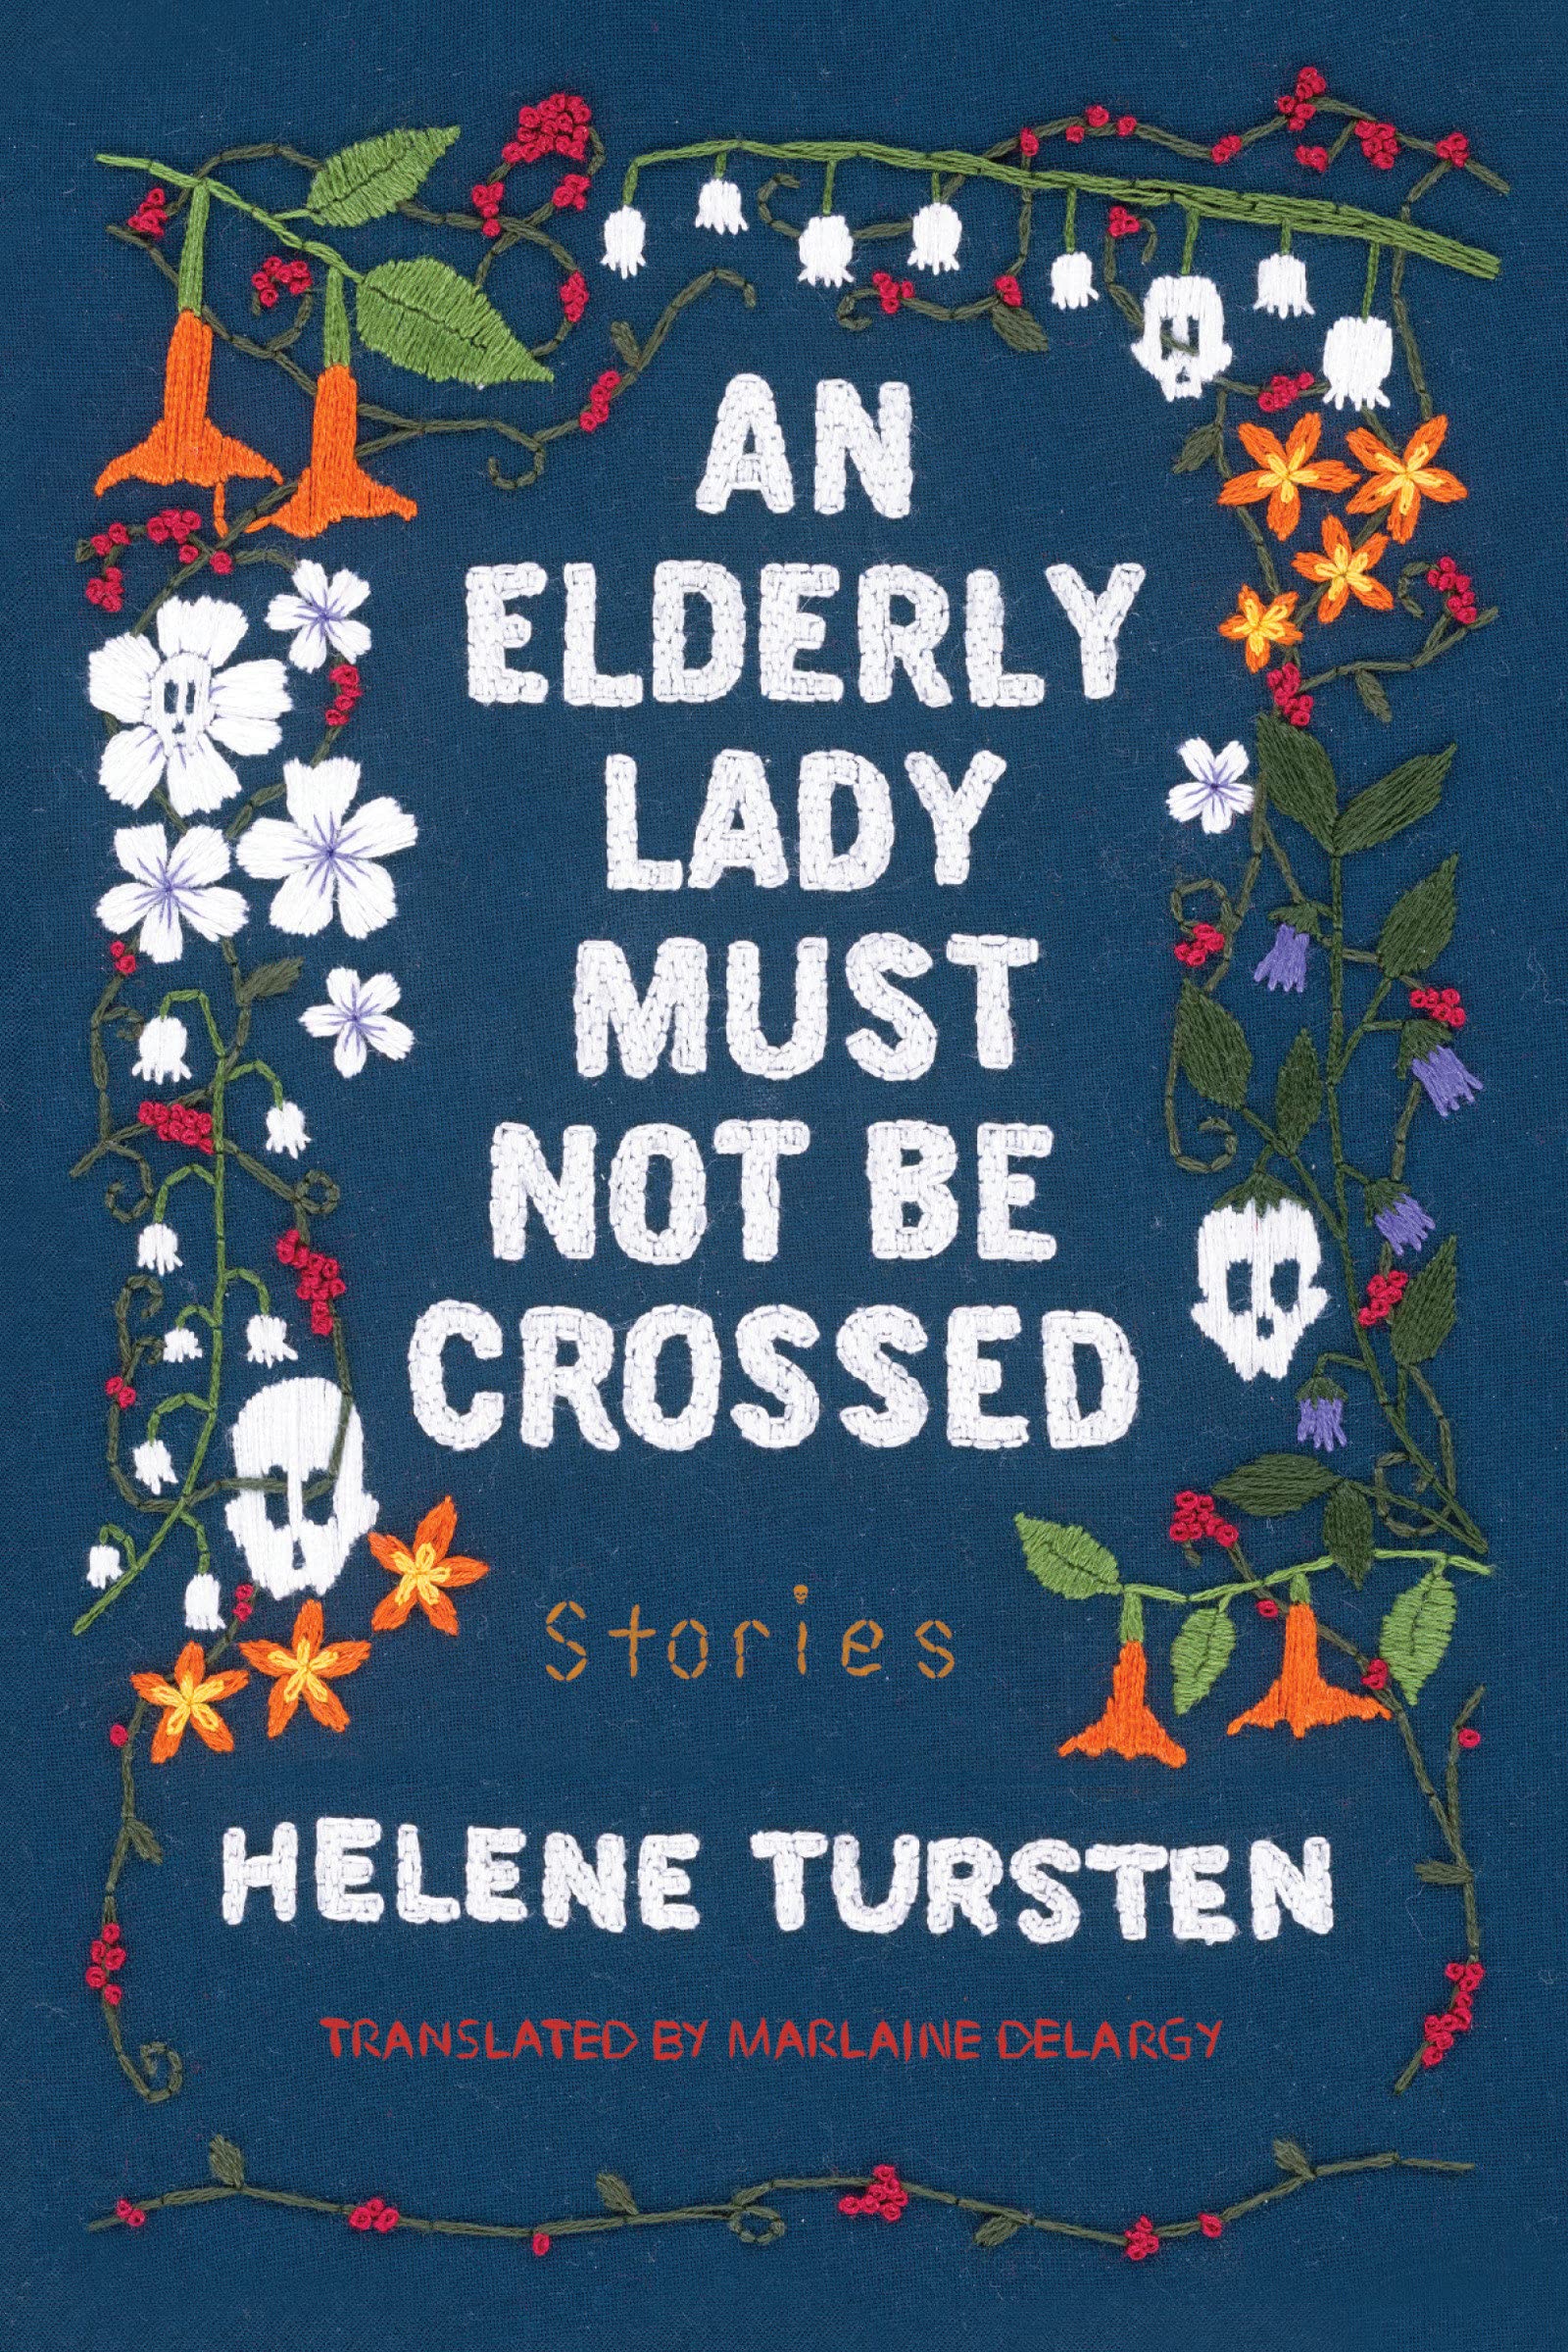 Book cover of An Elderly Lady Must Not Be Crossed, by Helene Tursten